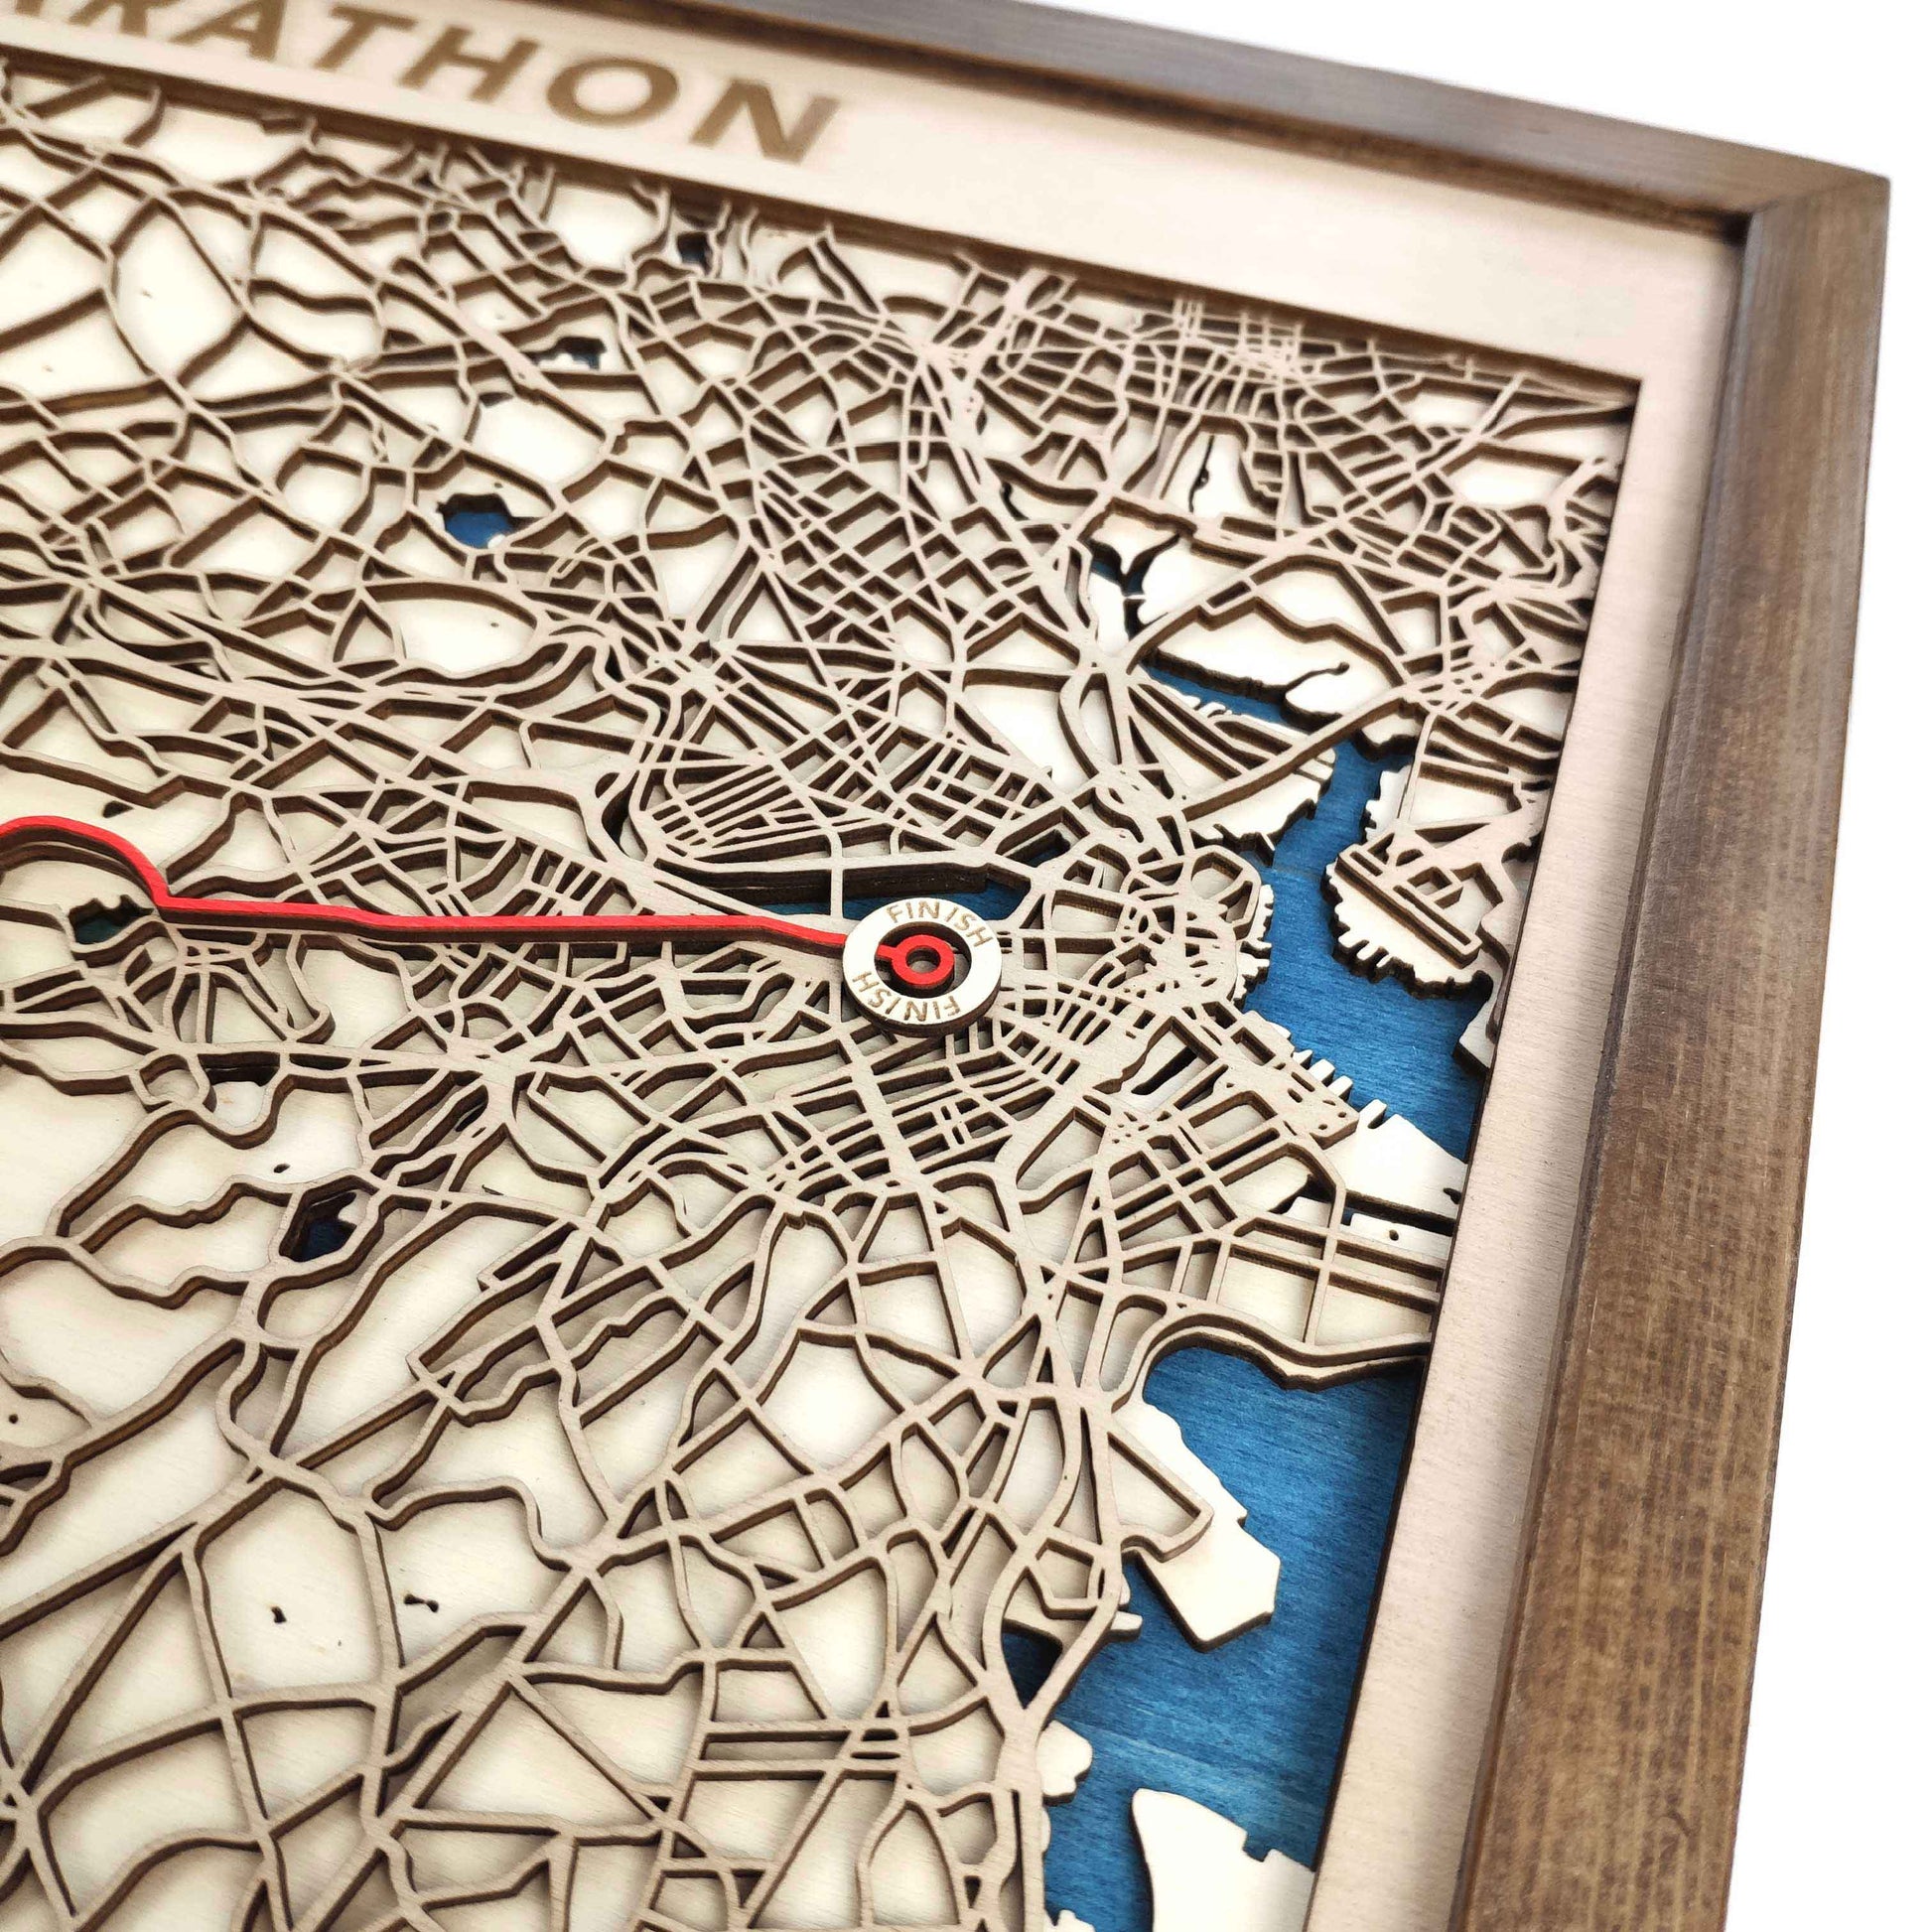 Boston Marathon Commemorative Wooden Route Map – Collector's Item by CityWood - Custom Wood Map Art - Unique Laser Cut Engraved - Anniversary Gift